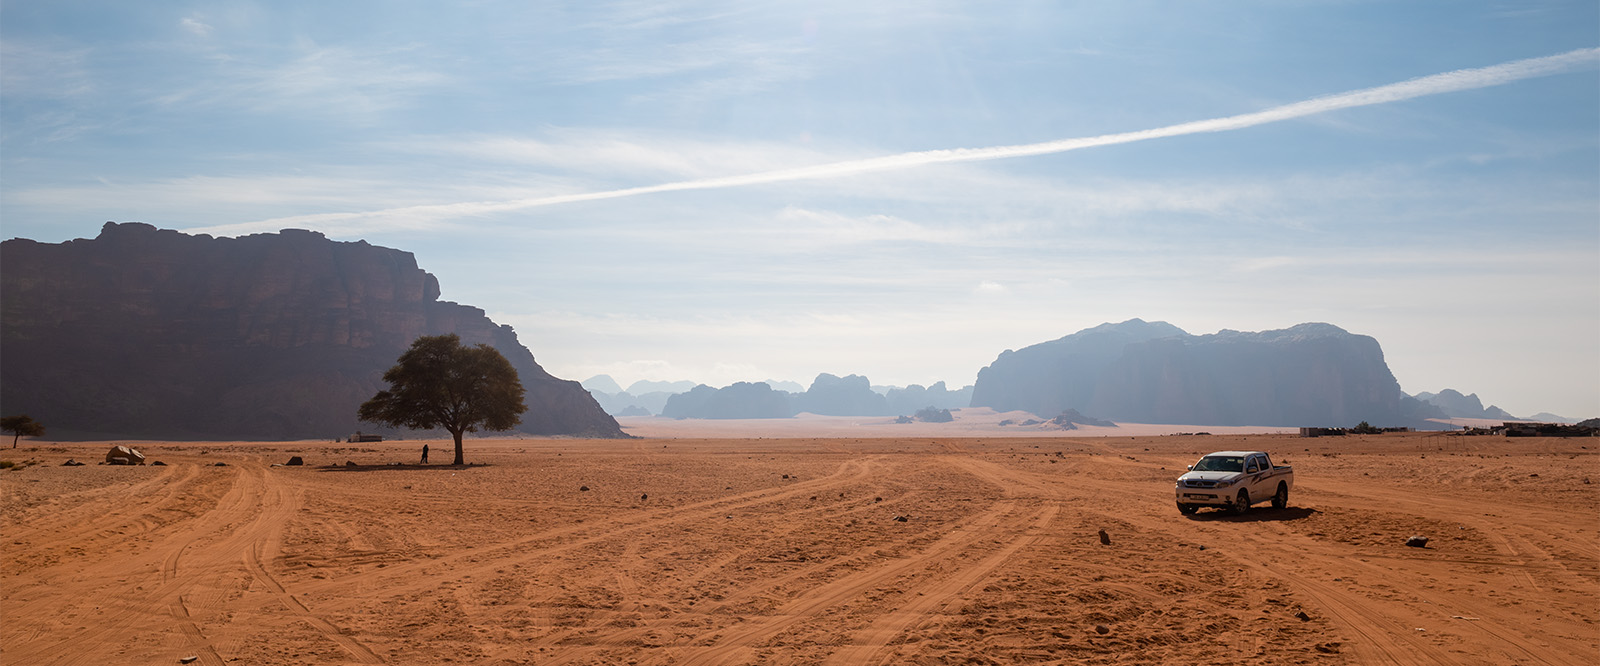 Panoramic of the Wadi Rum desert with a tree and truck